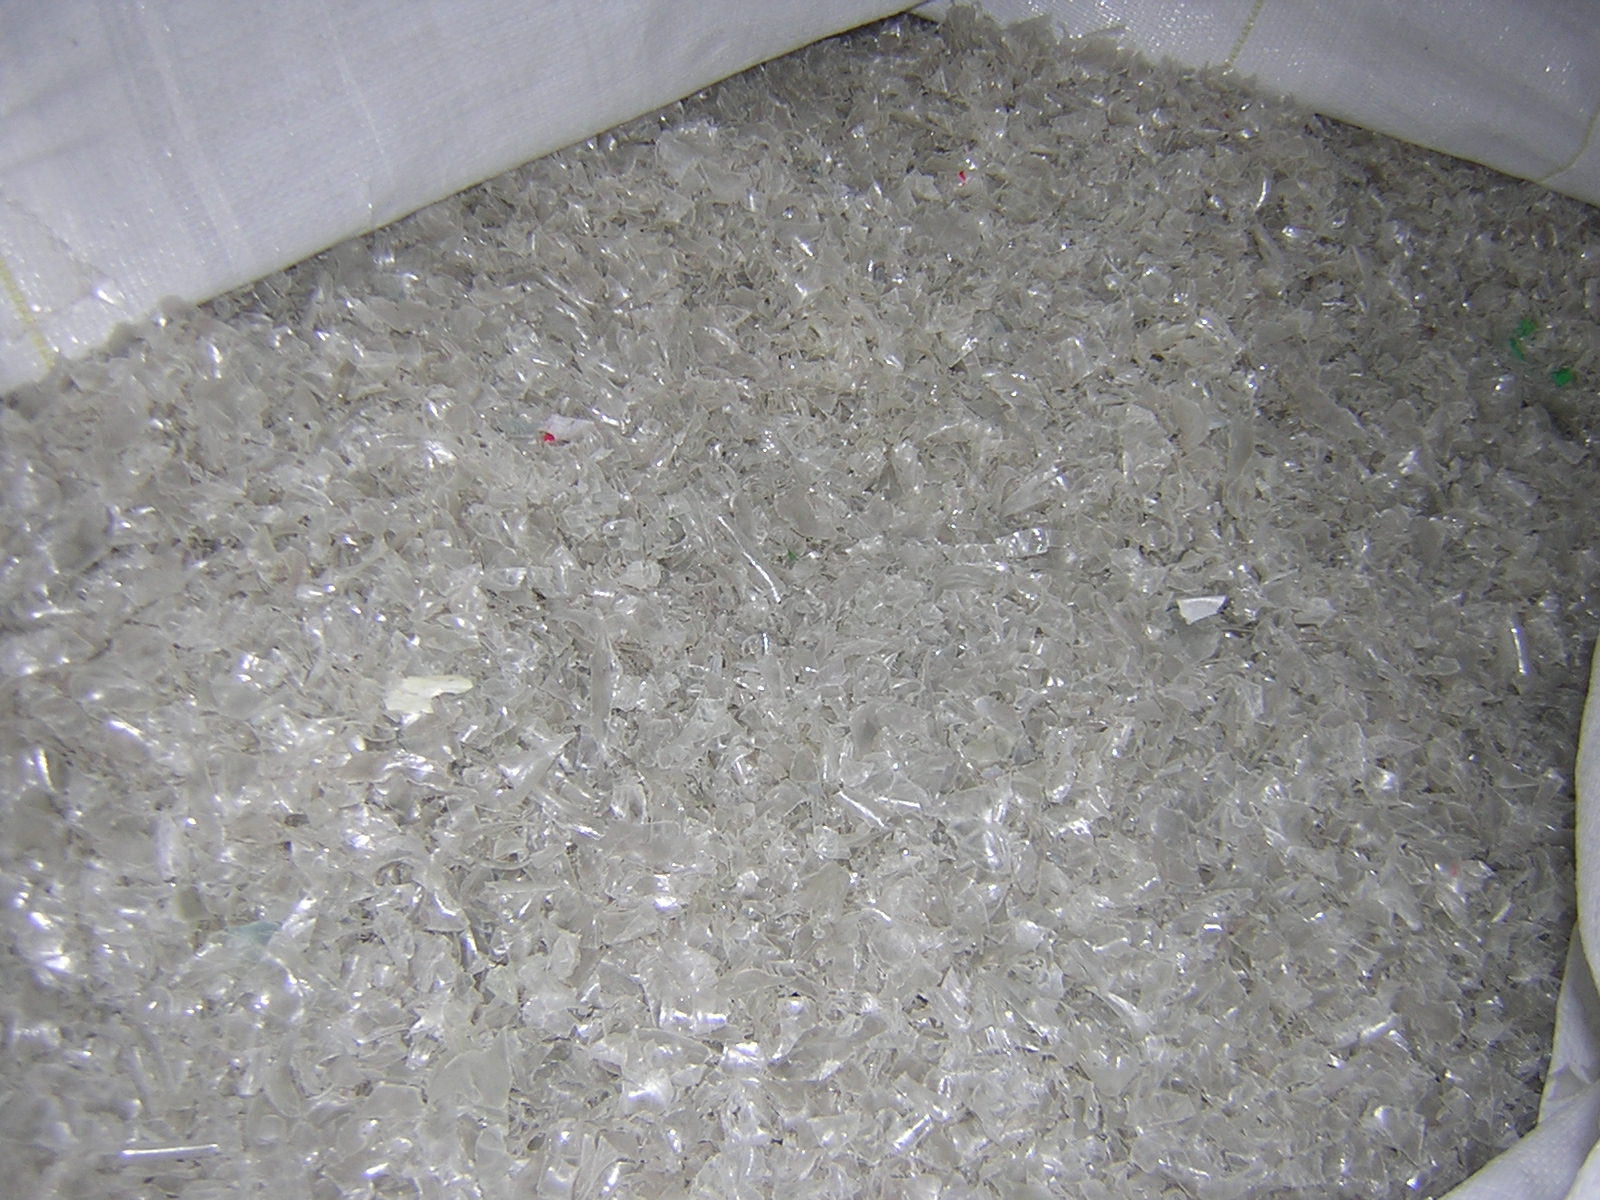 Clear PET flakes